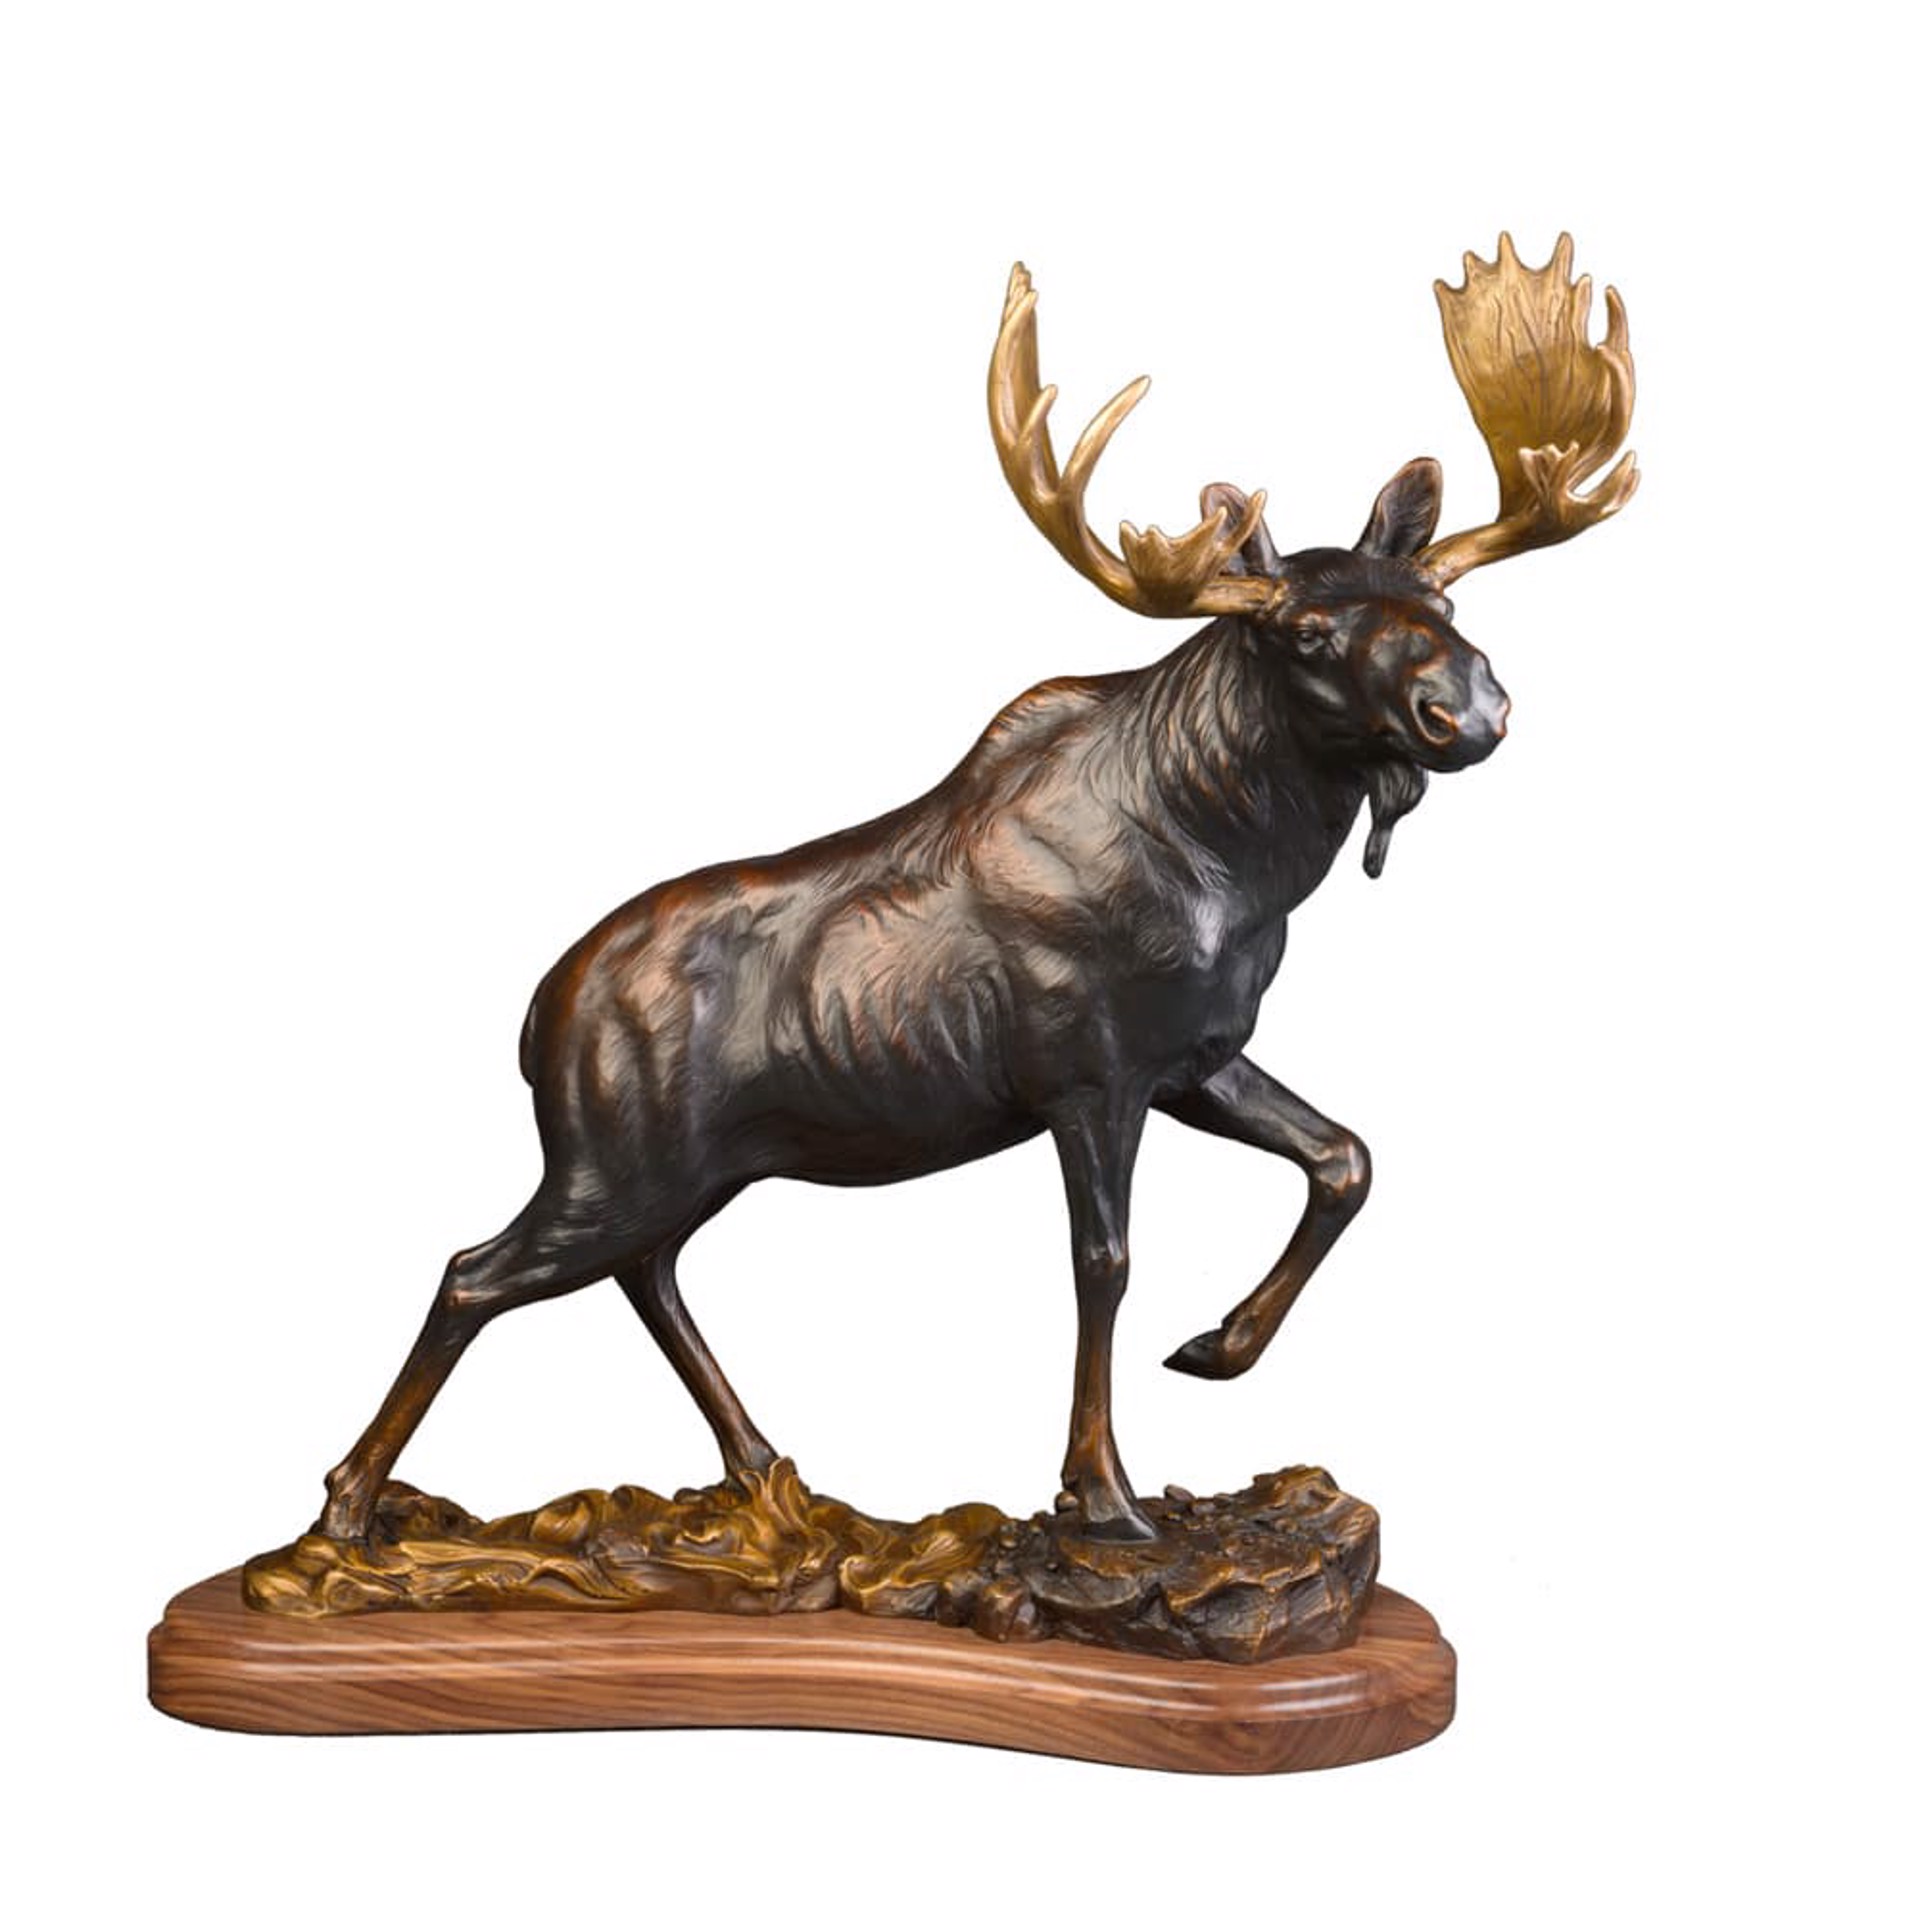 A Bronze Of A Bull Moose Available At Gallery Wild